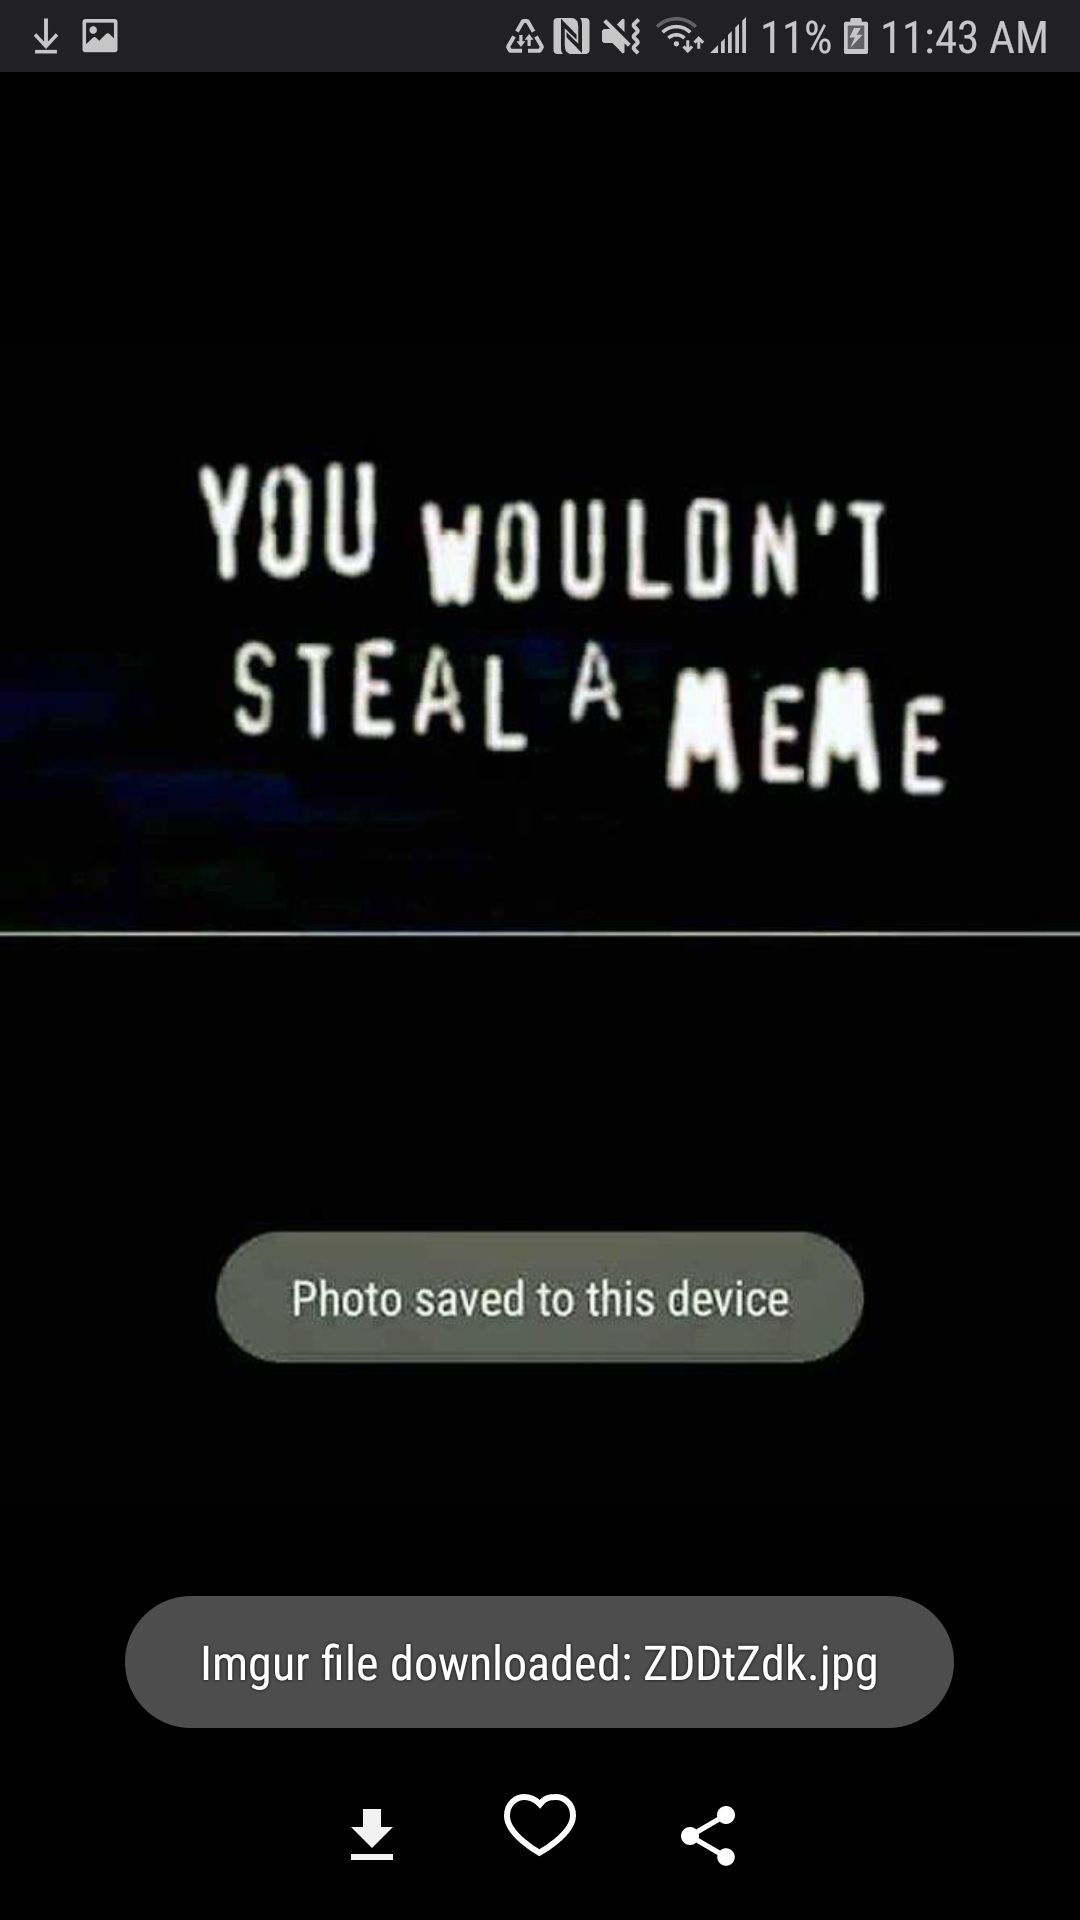 you wouldn t download - Nv Prievul 11% You Wouldn'I _STEALA Meme Photo saved to this device Imgur file downloaded ZDDtZdk.jpg